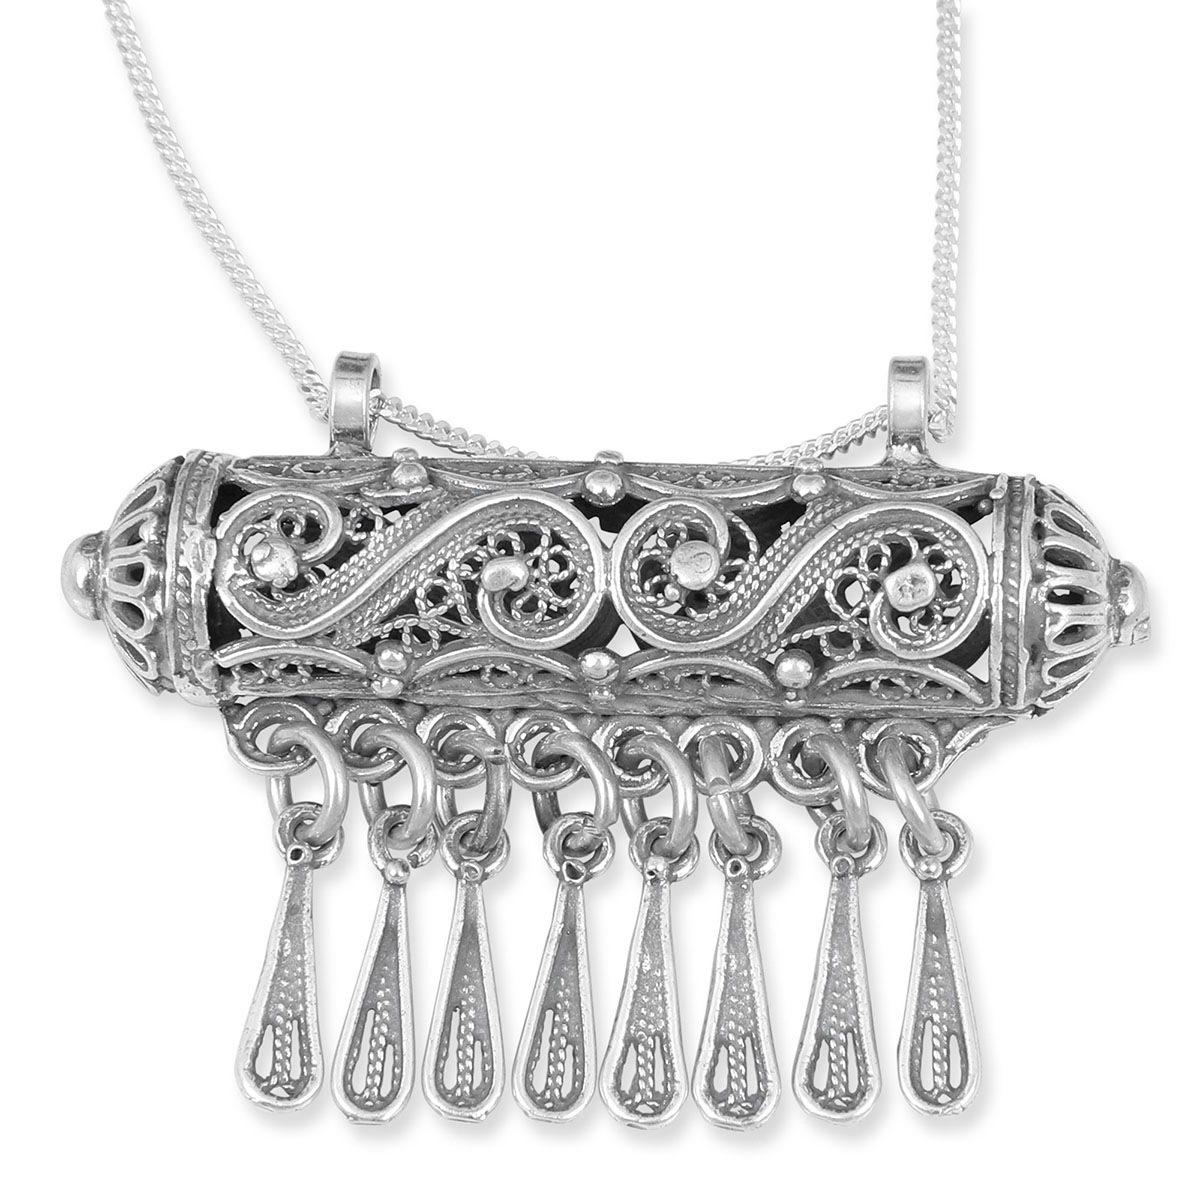 Traditional Yemenite Art Handcrafted Sterling Silver Refined Mezuzah  Necklace With Filigree Design, Jewelry | Judaica Webstore